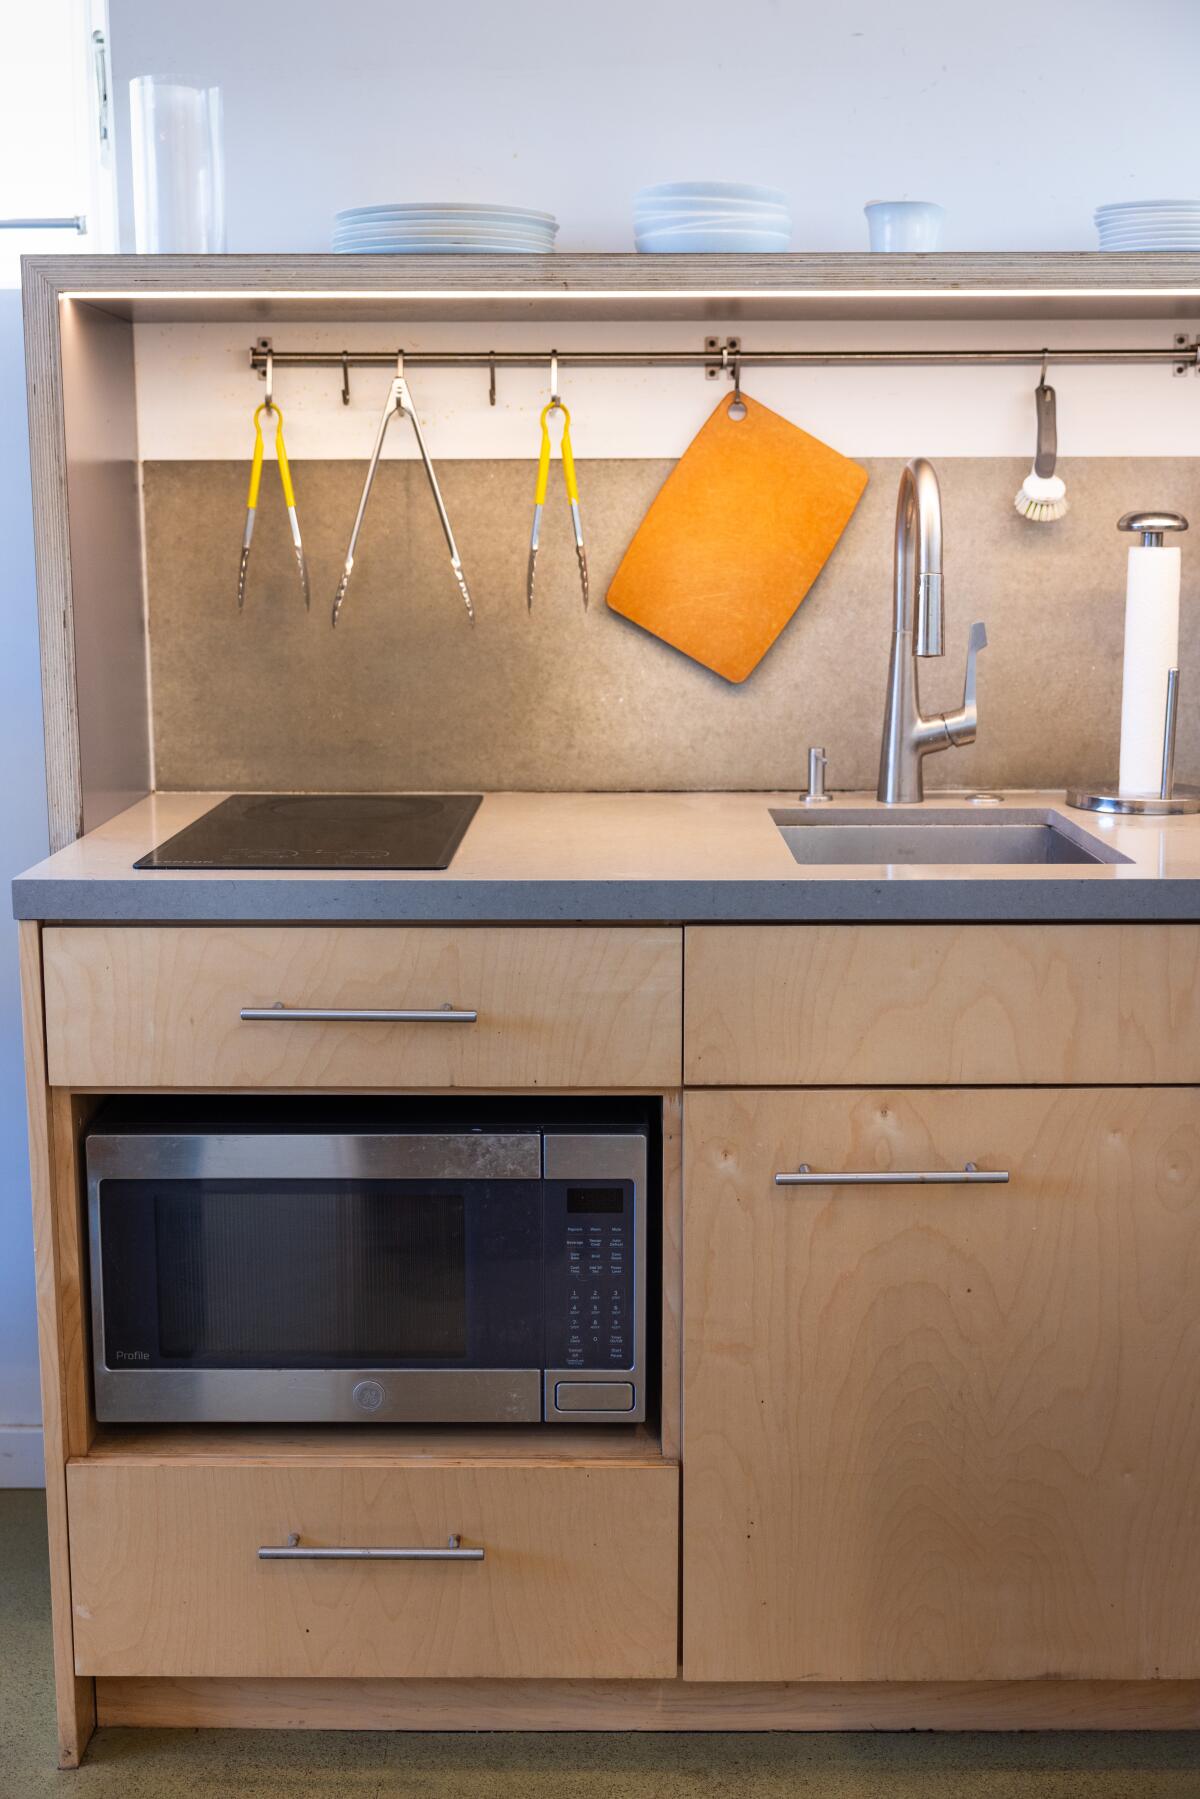 An induction stove sits above the microwave and near the small sink in the kitchen.